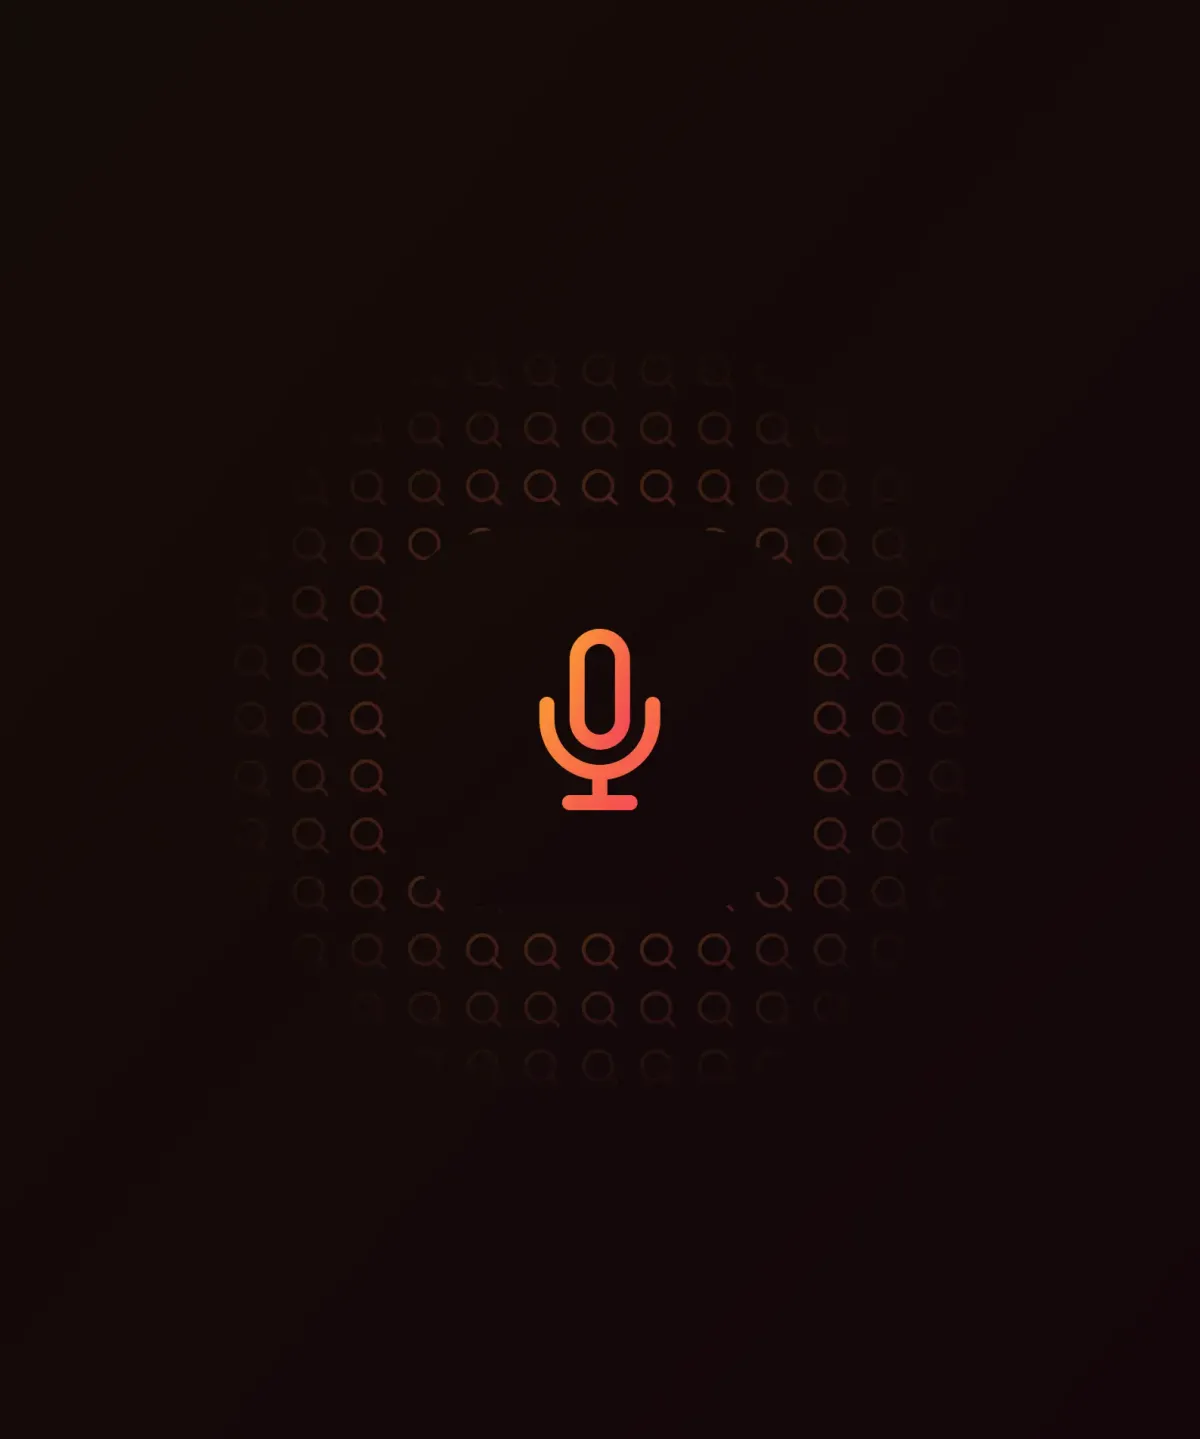 The Complete Guide to Voice Search Optimization in 2023